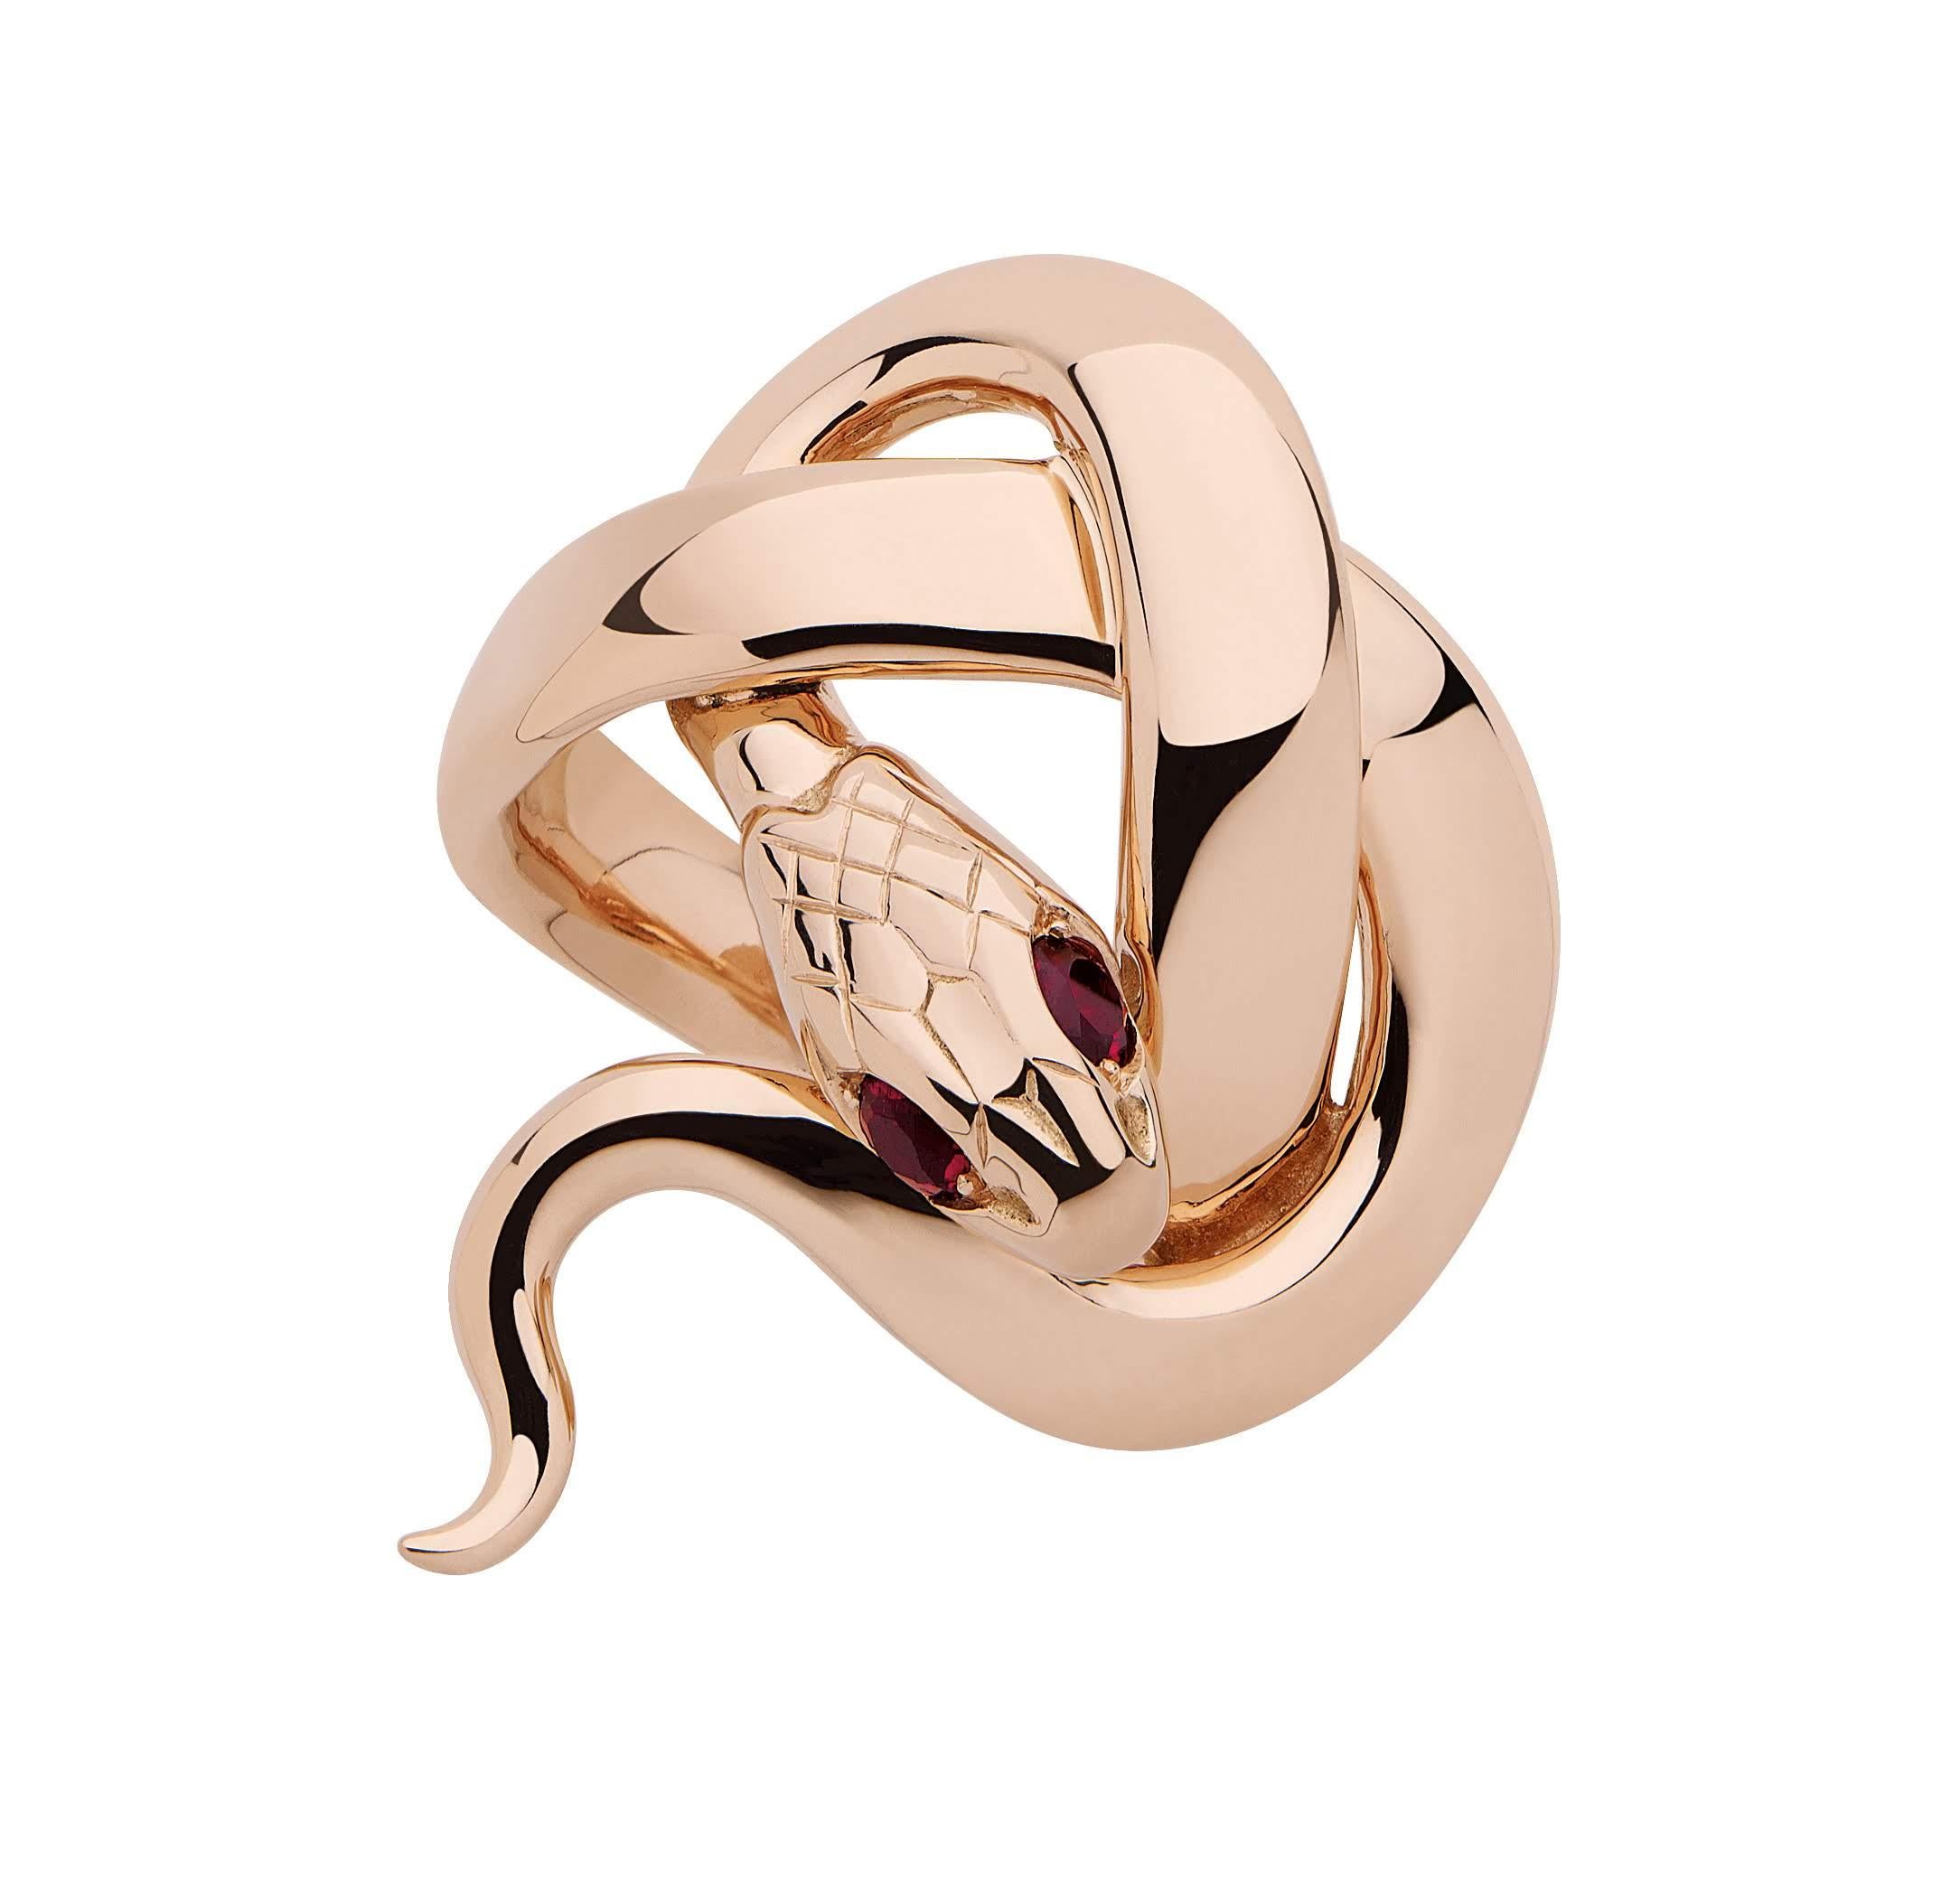 Sylvie Corbelin Signature Snake Ring in 18K Rose Gold and Rubies For Sale